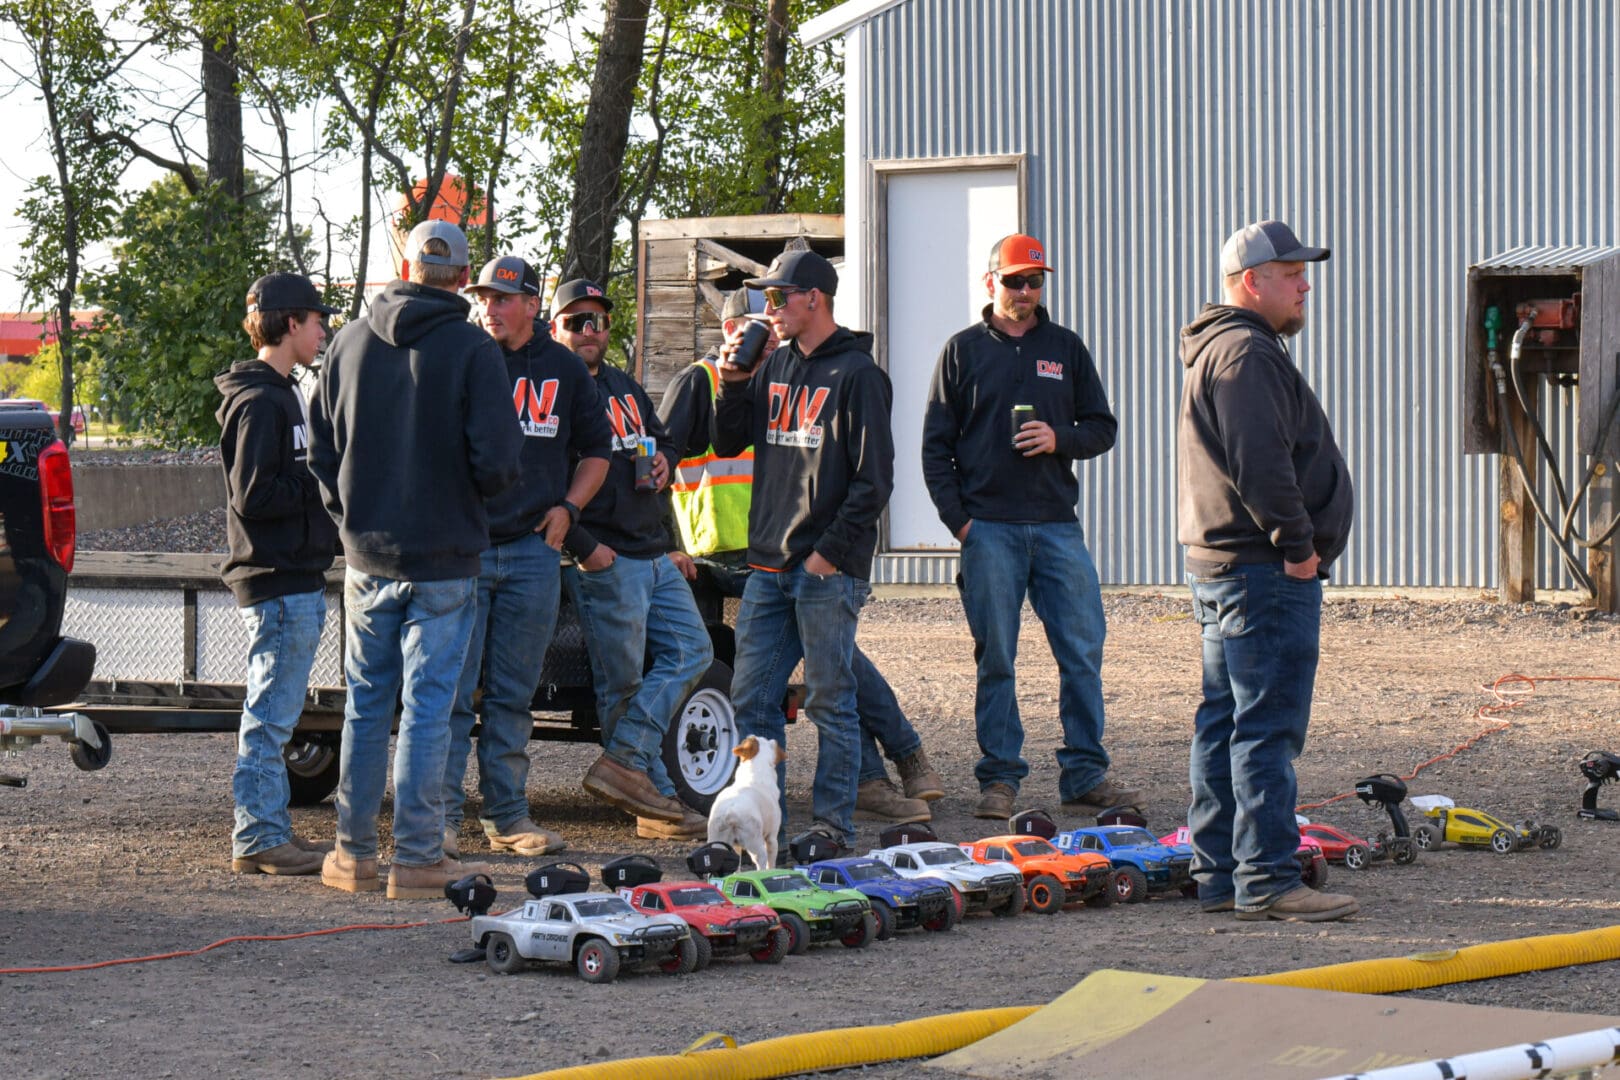 A group of men standing around a pile of toy trucks.